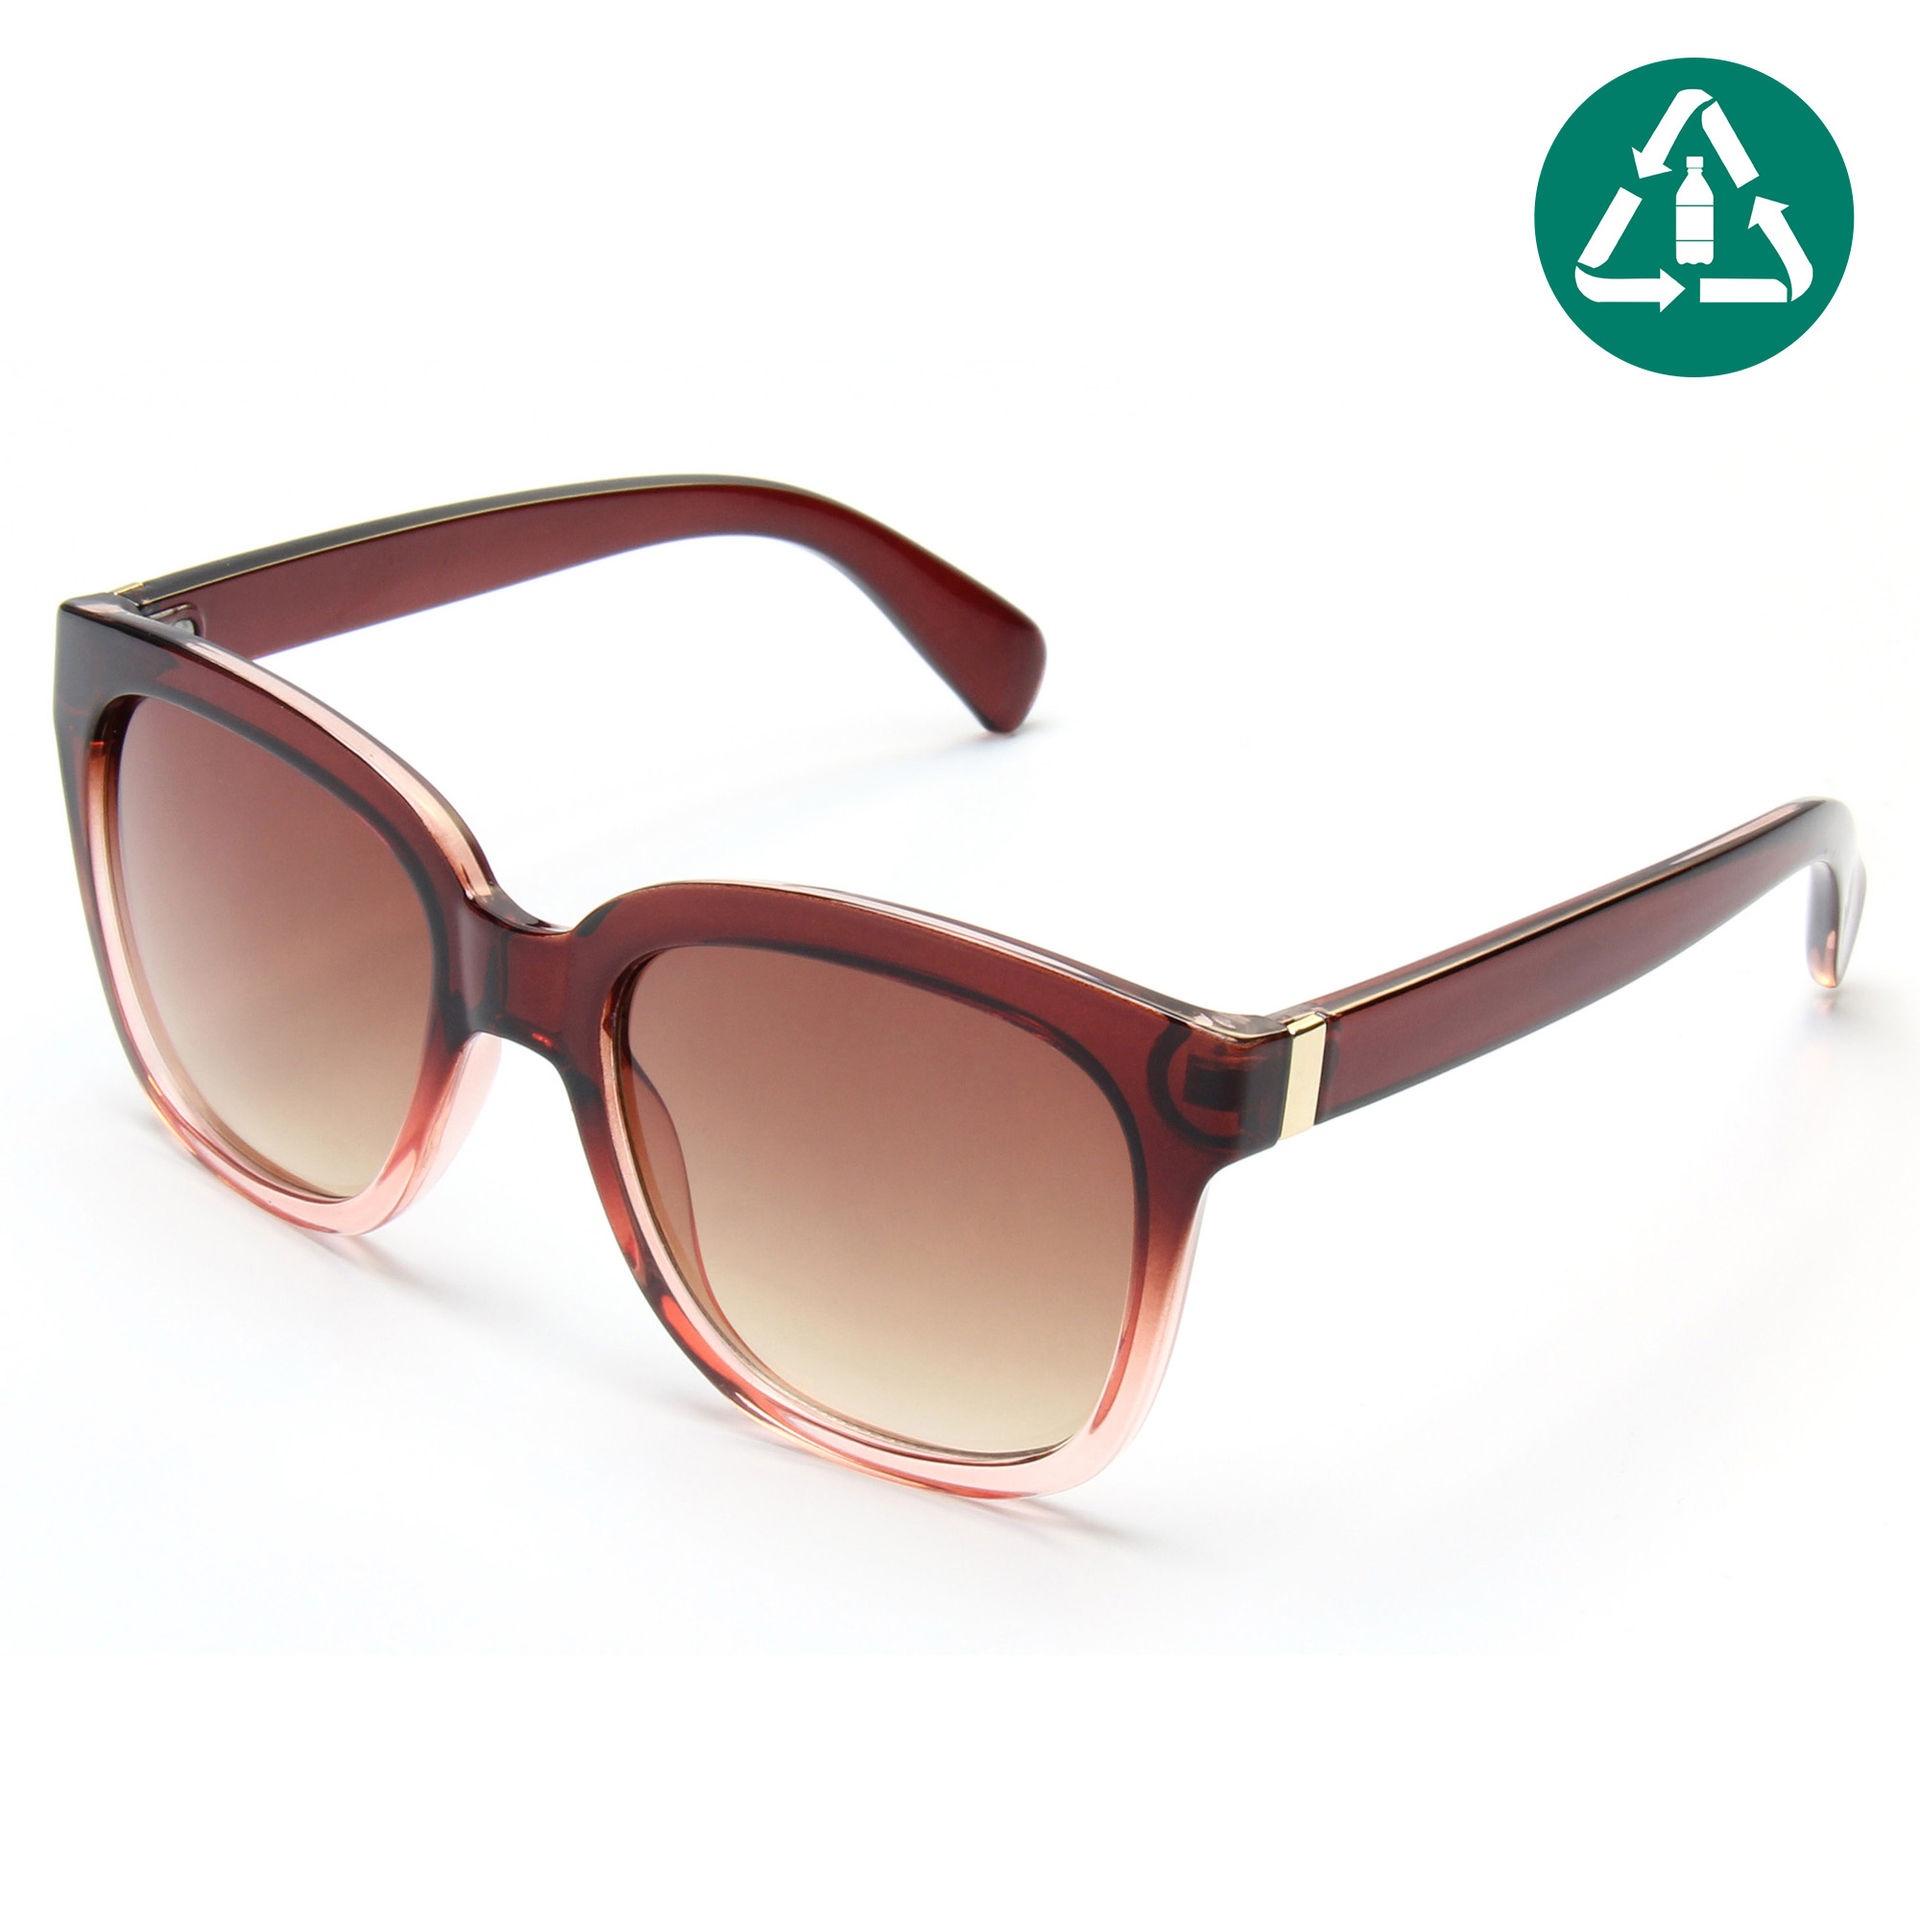 low-cost recycled sunglasses wholesale overseas market